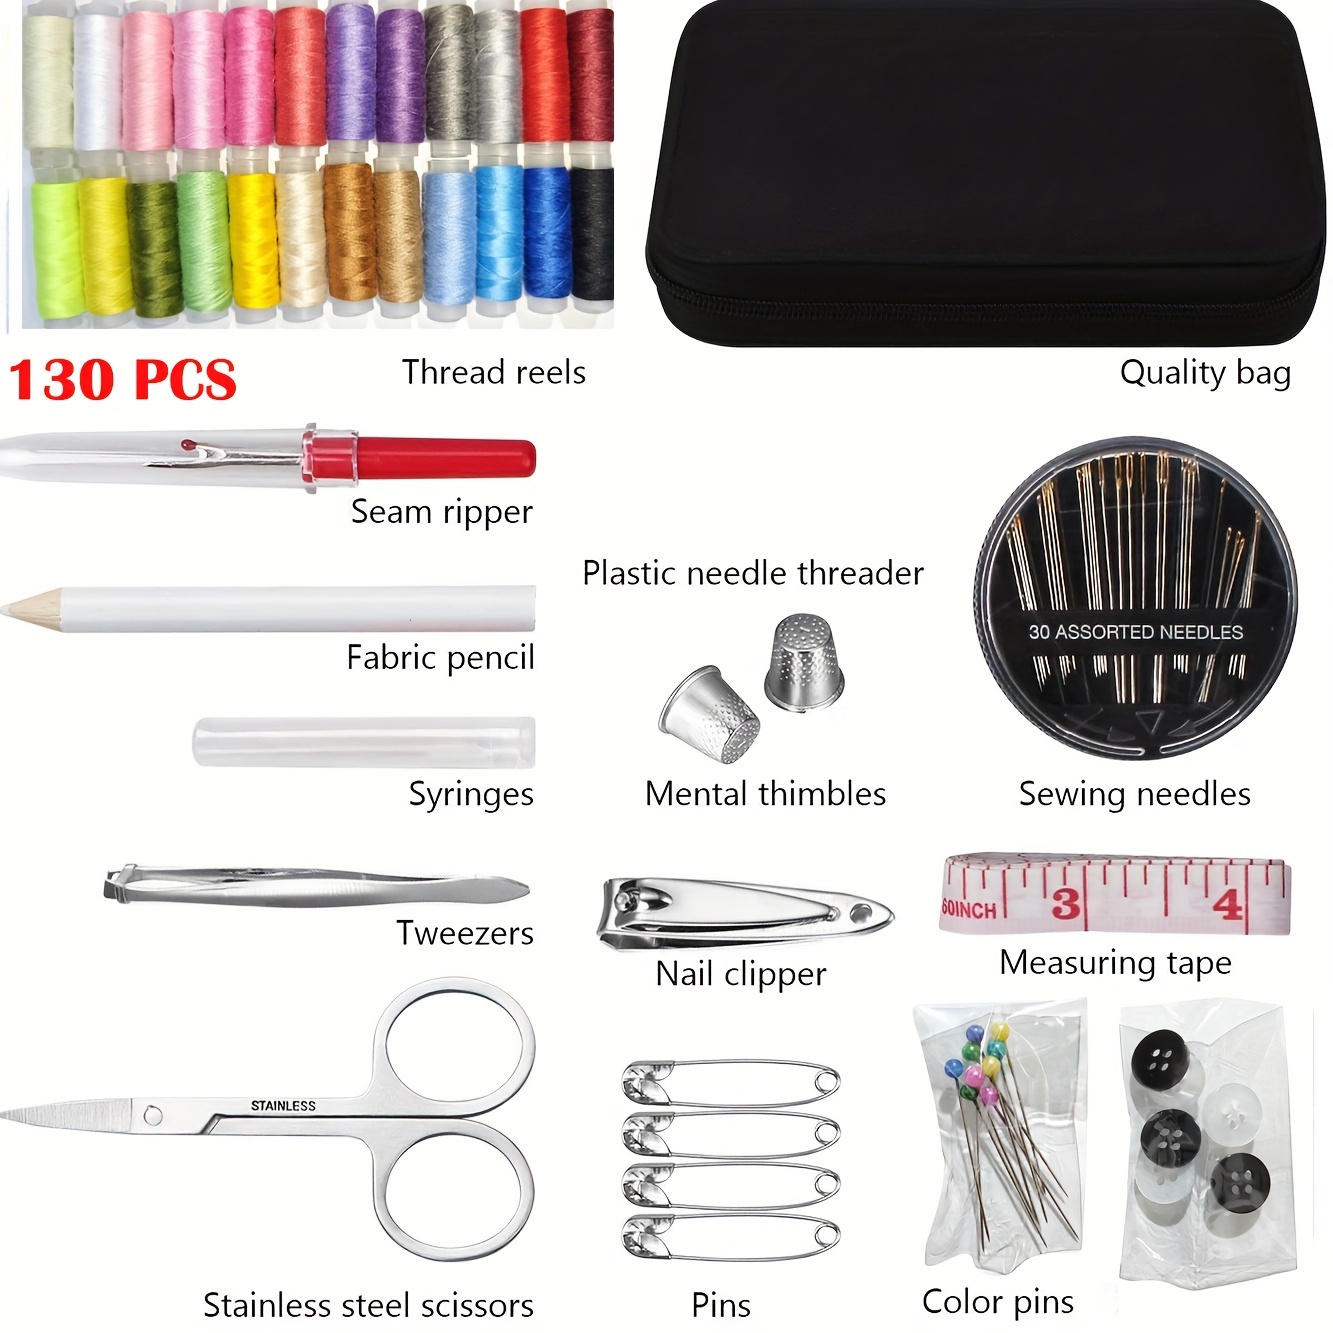 Embroidex Sewing Kit for Home, Travel & Emergencies - Filled with Quality Notion